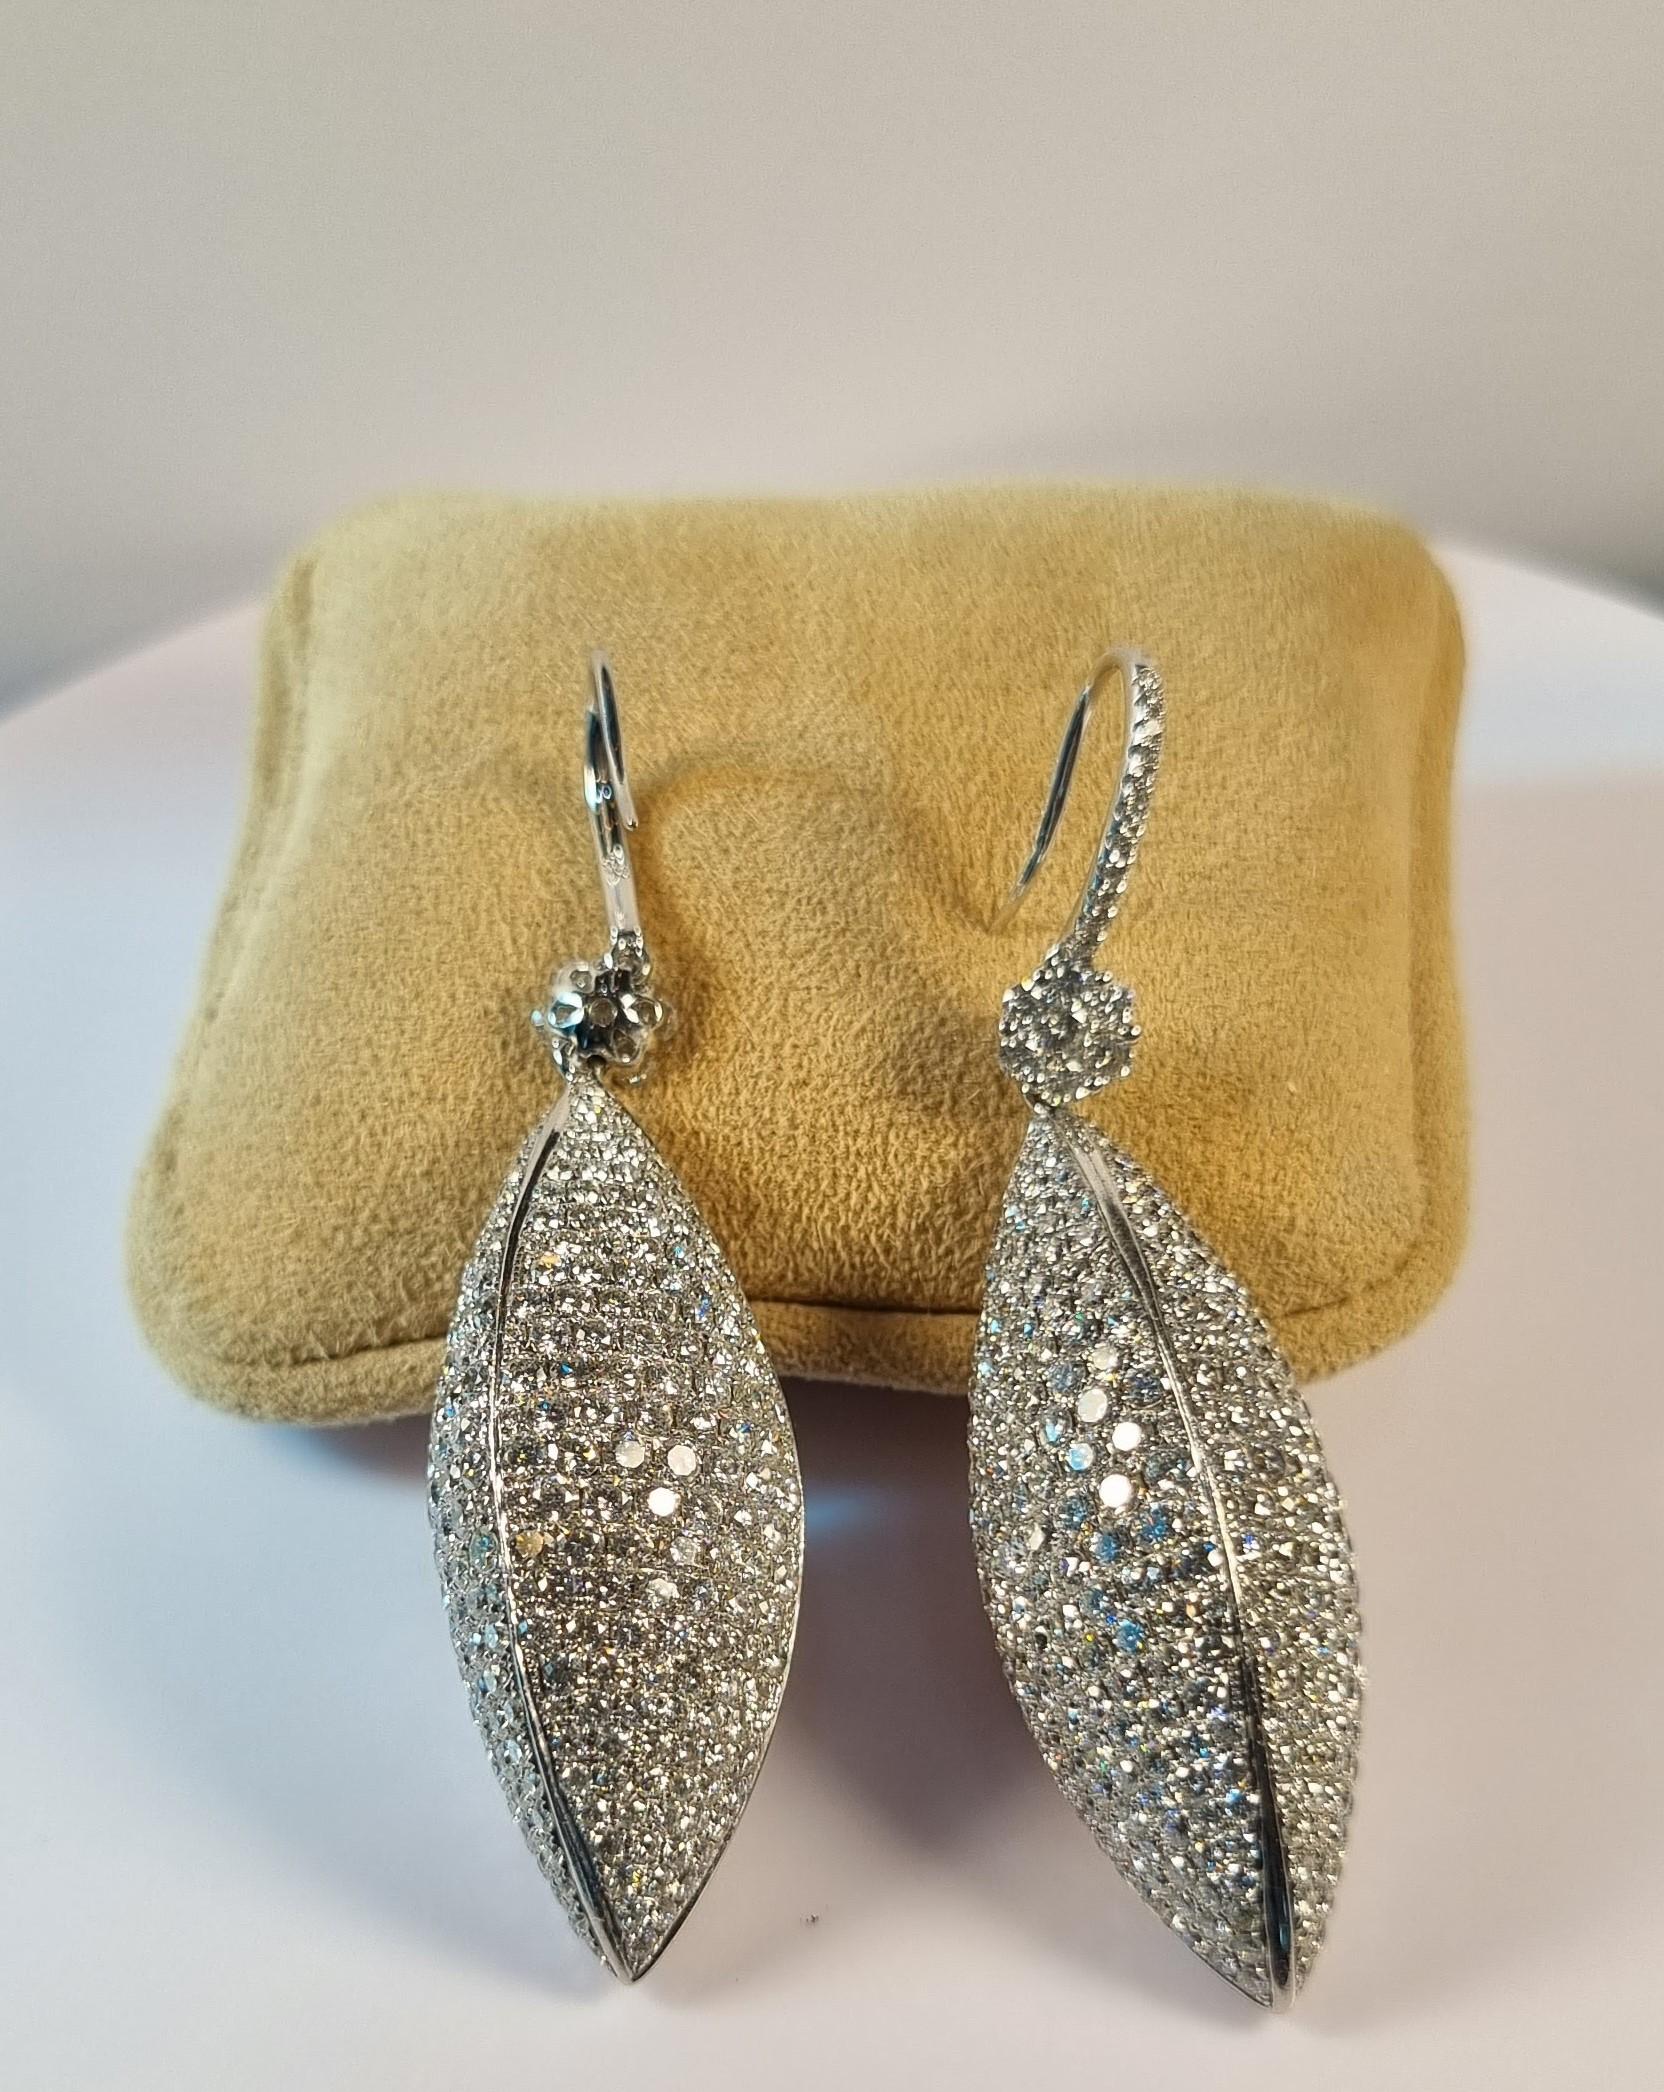 Oval shape Pavé of  diamonds earrings 
918  Diamonds total 15.20ct.
Diamond Quality  G VS
Length 80mm / 3.14in.
Weight 19.34gr total the two
Irama Pradera is a Young designer from Spain that searches always for the best gems and combines classic